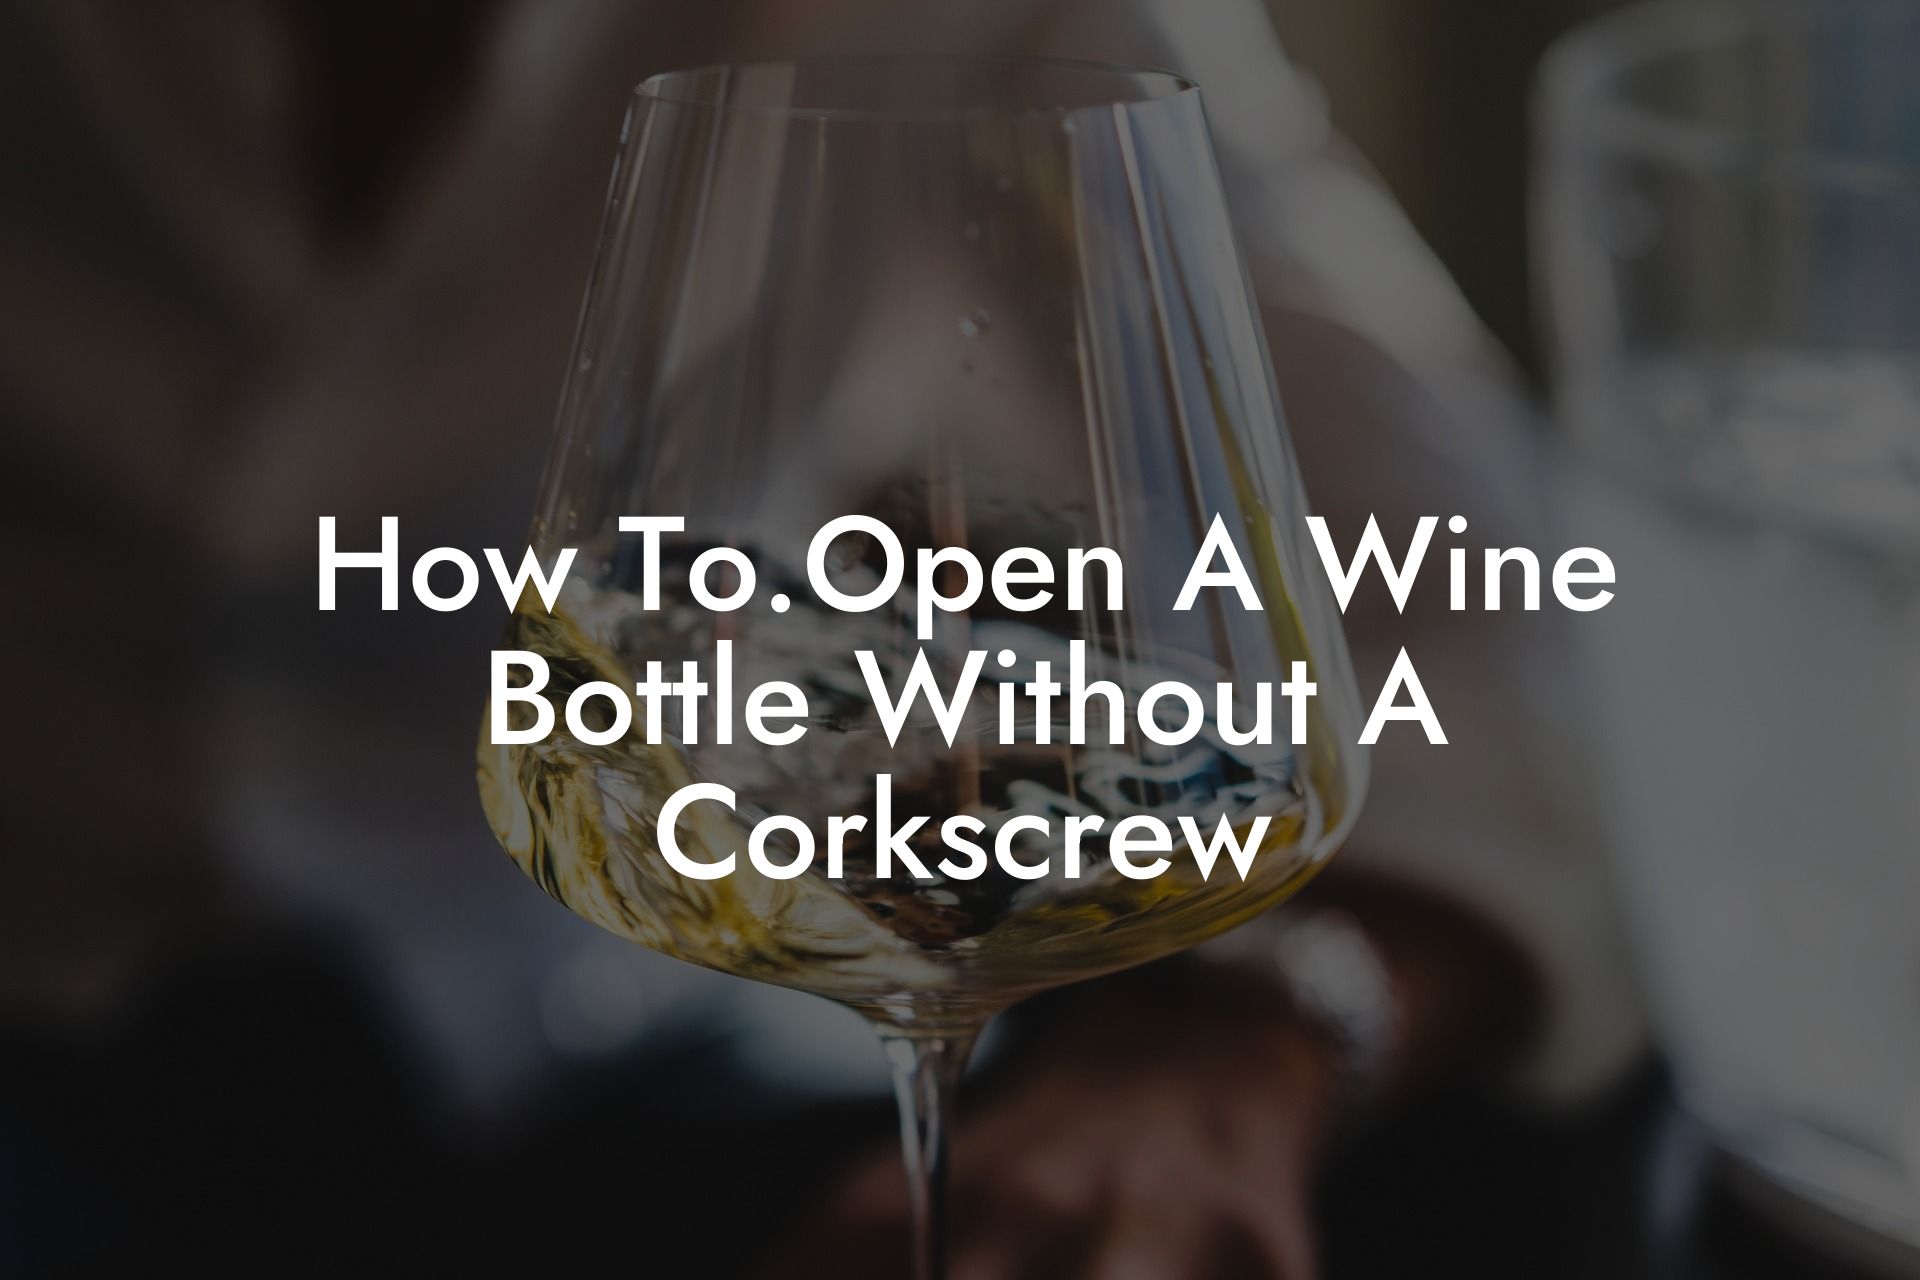 How To.Open A Wine Bottle Without A Corkscrew